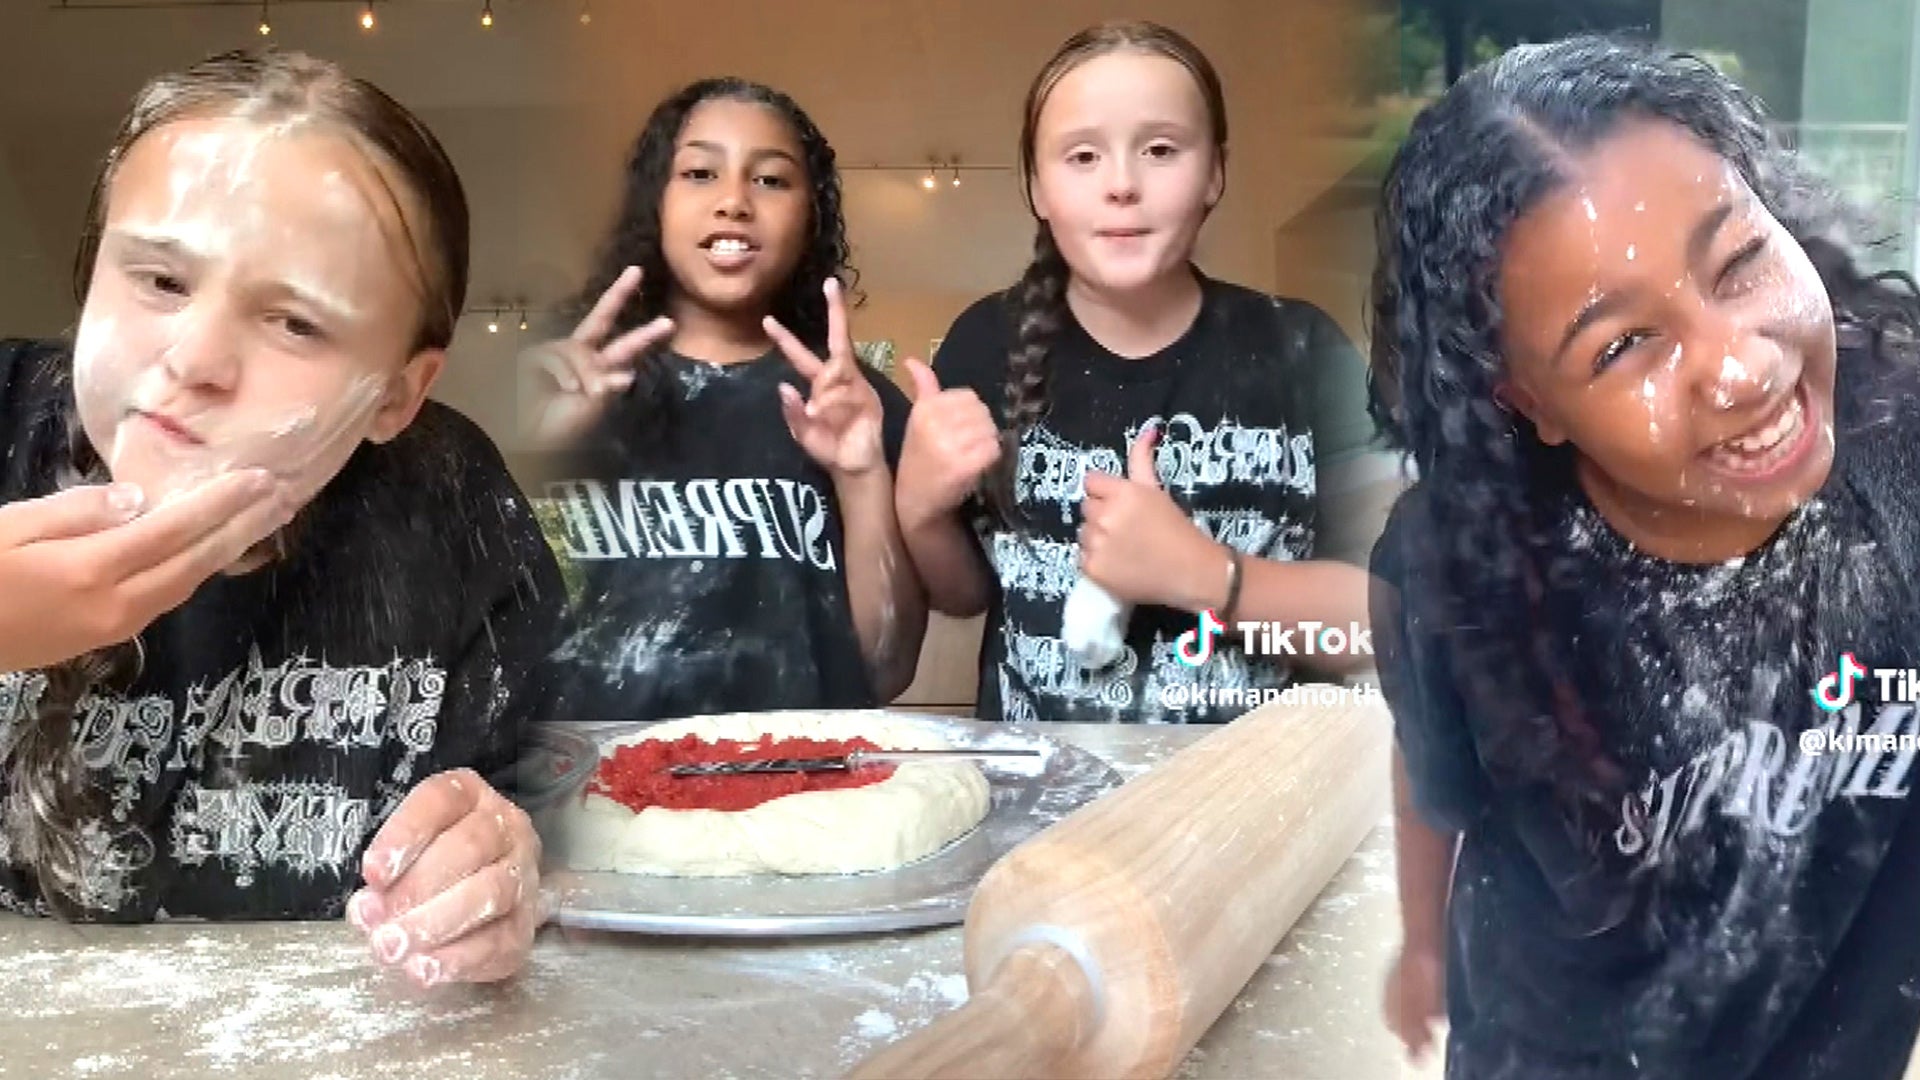 Watch North West and Selena Gomez’s Sister Gracie Sing, Dance and Make Pizza on TikTok